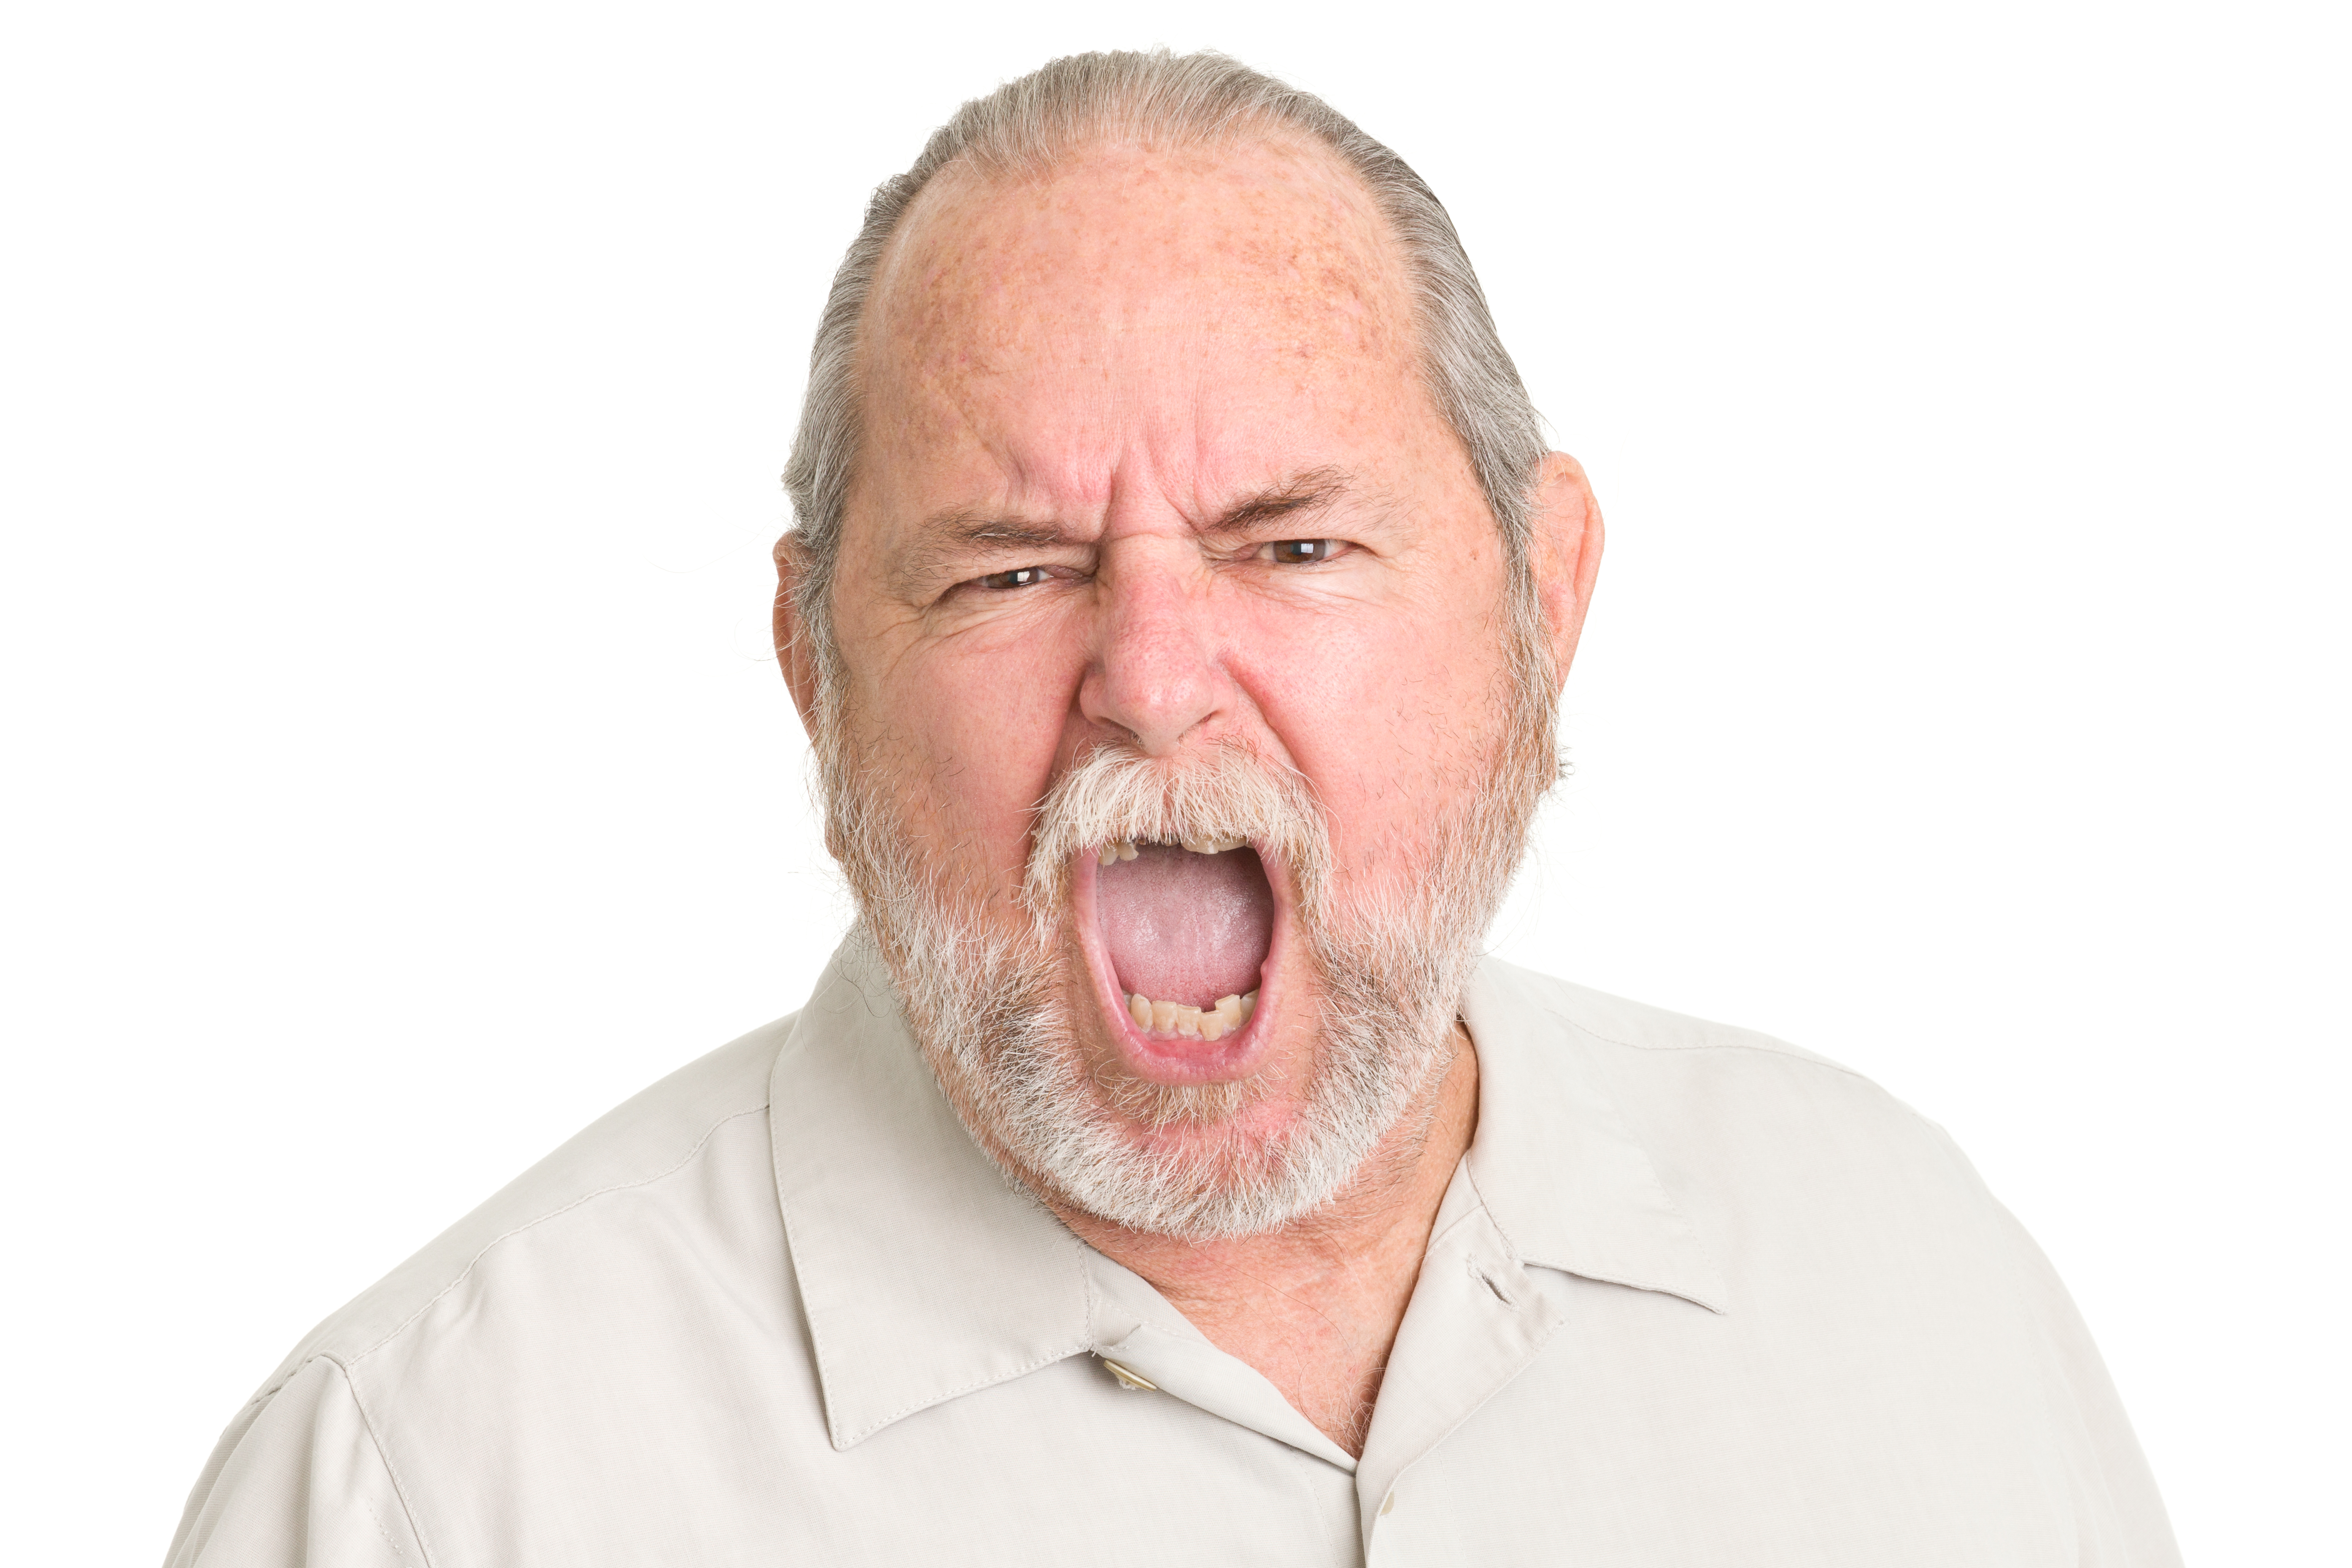 Older man yelling | Source: Getty Images